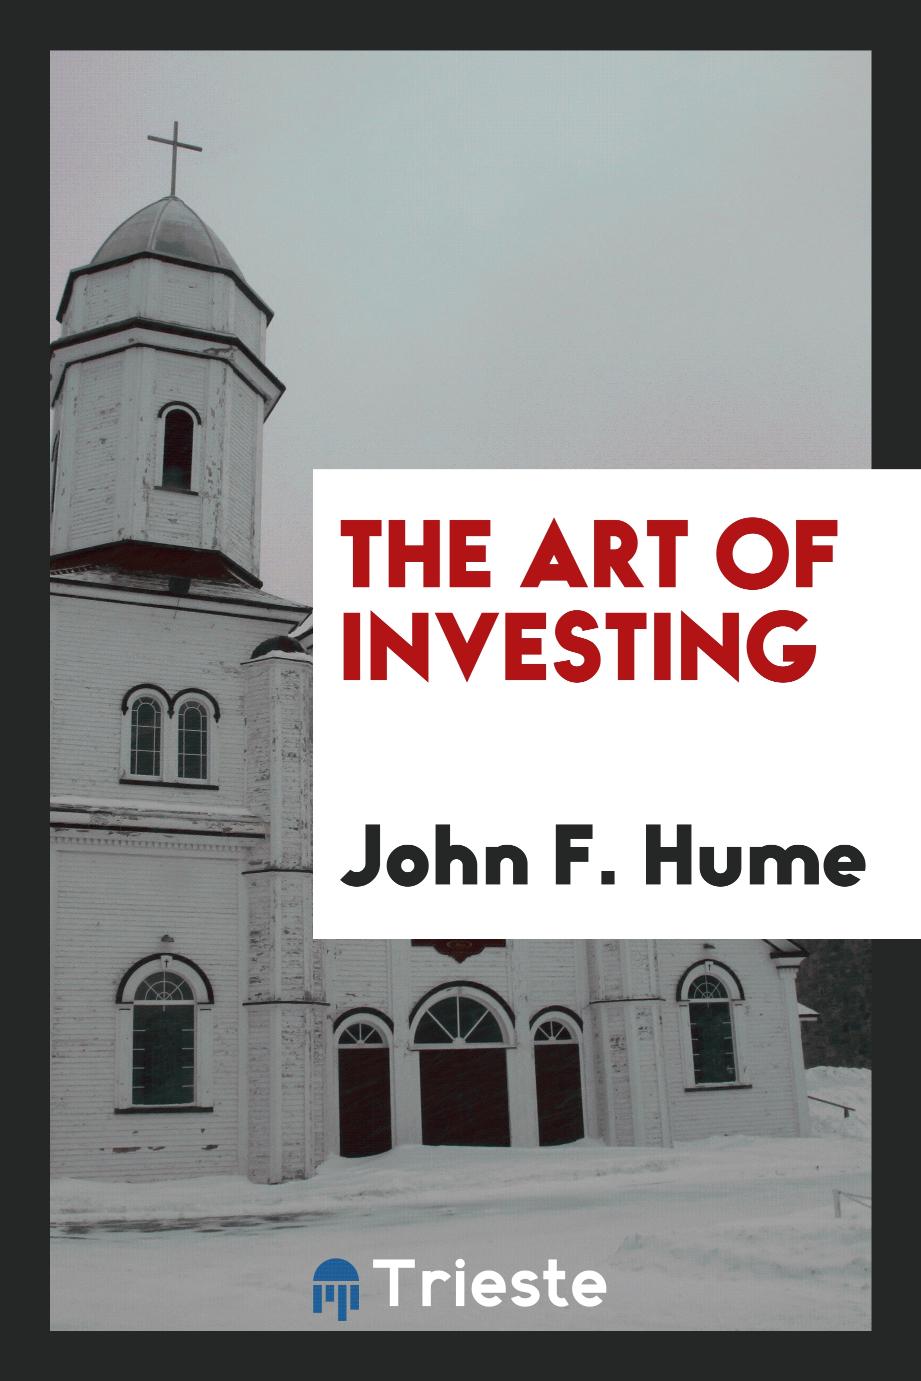 The art of investing